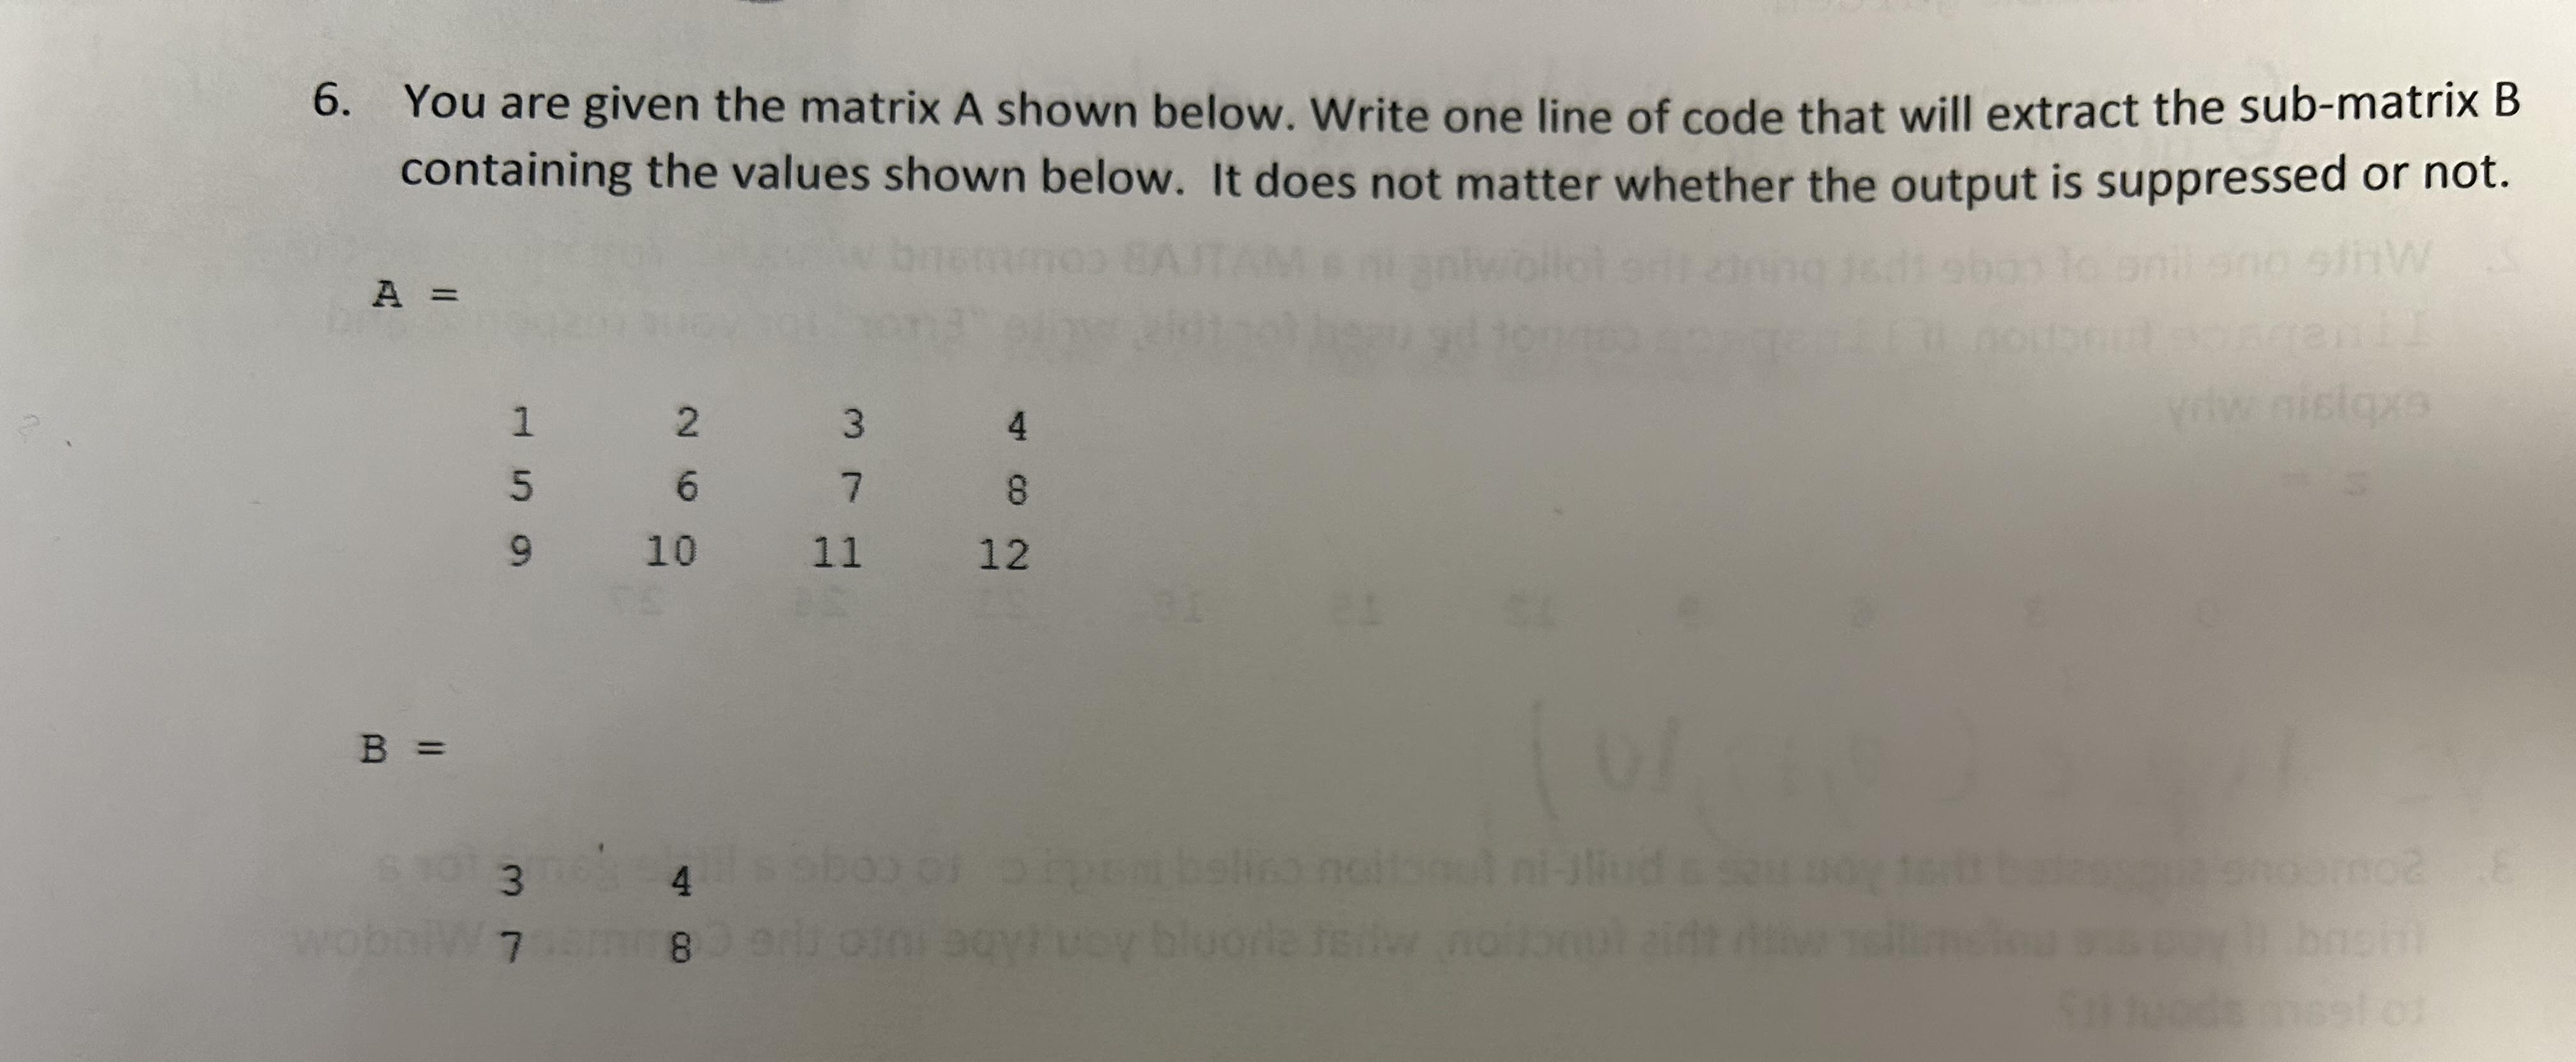 6. You are given the matrix A shown below. Write one line of code that will extract the sub-matrix B